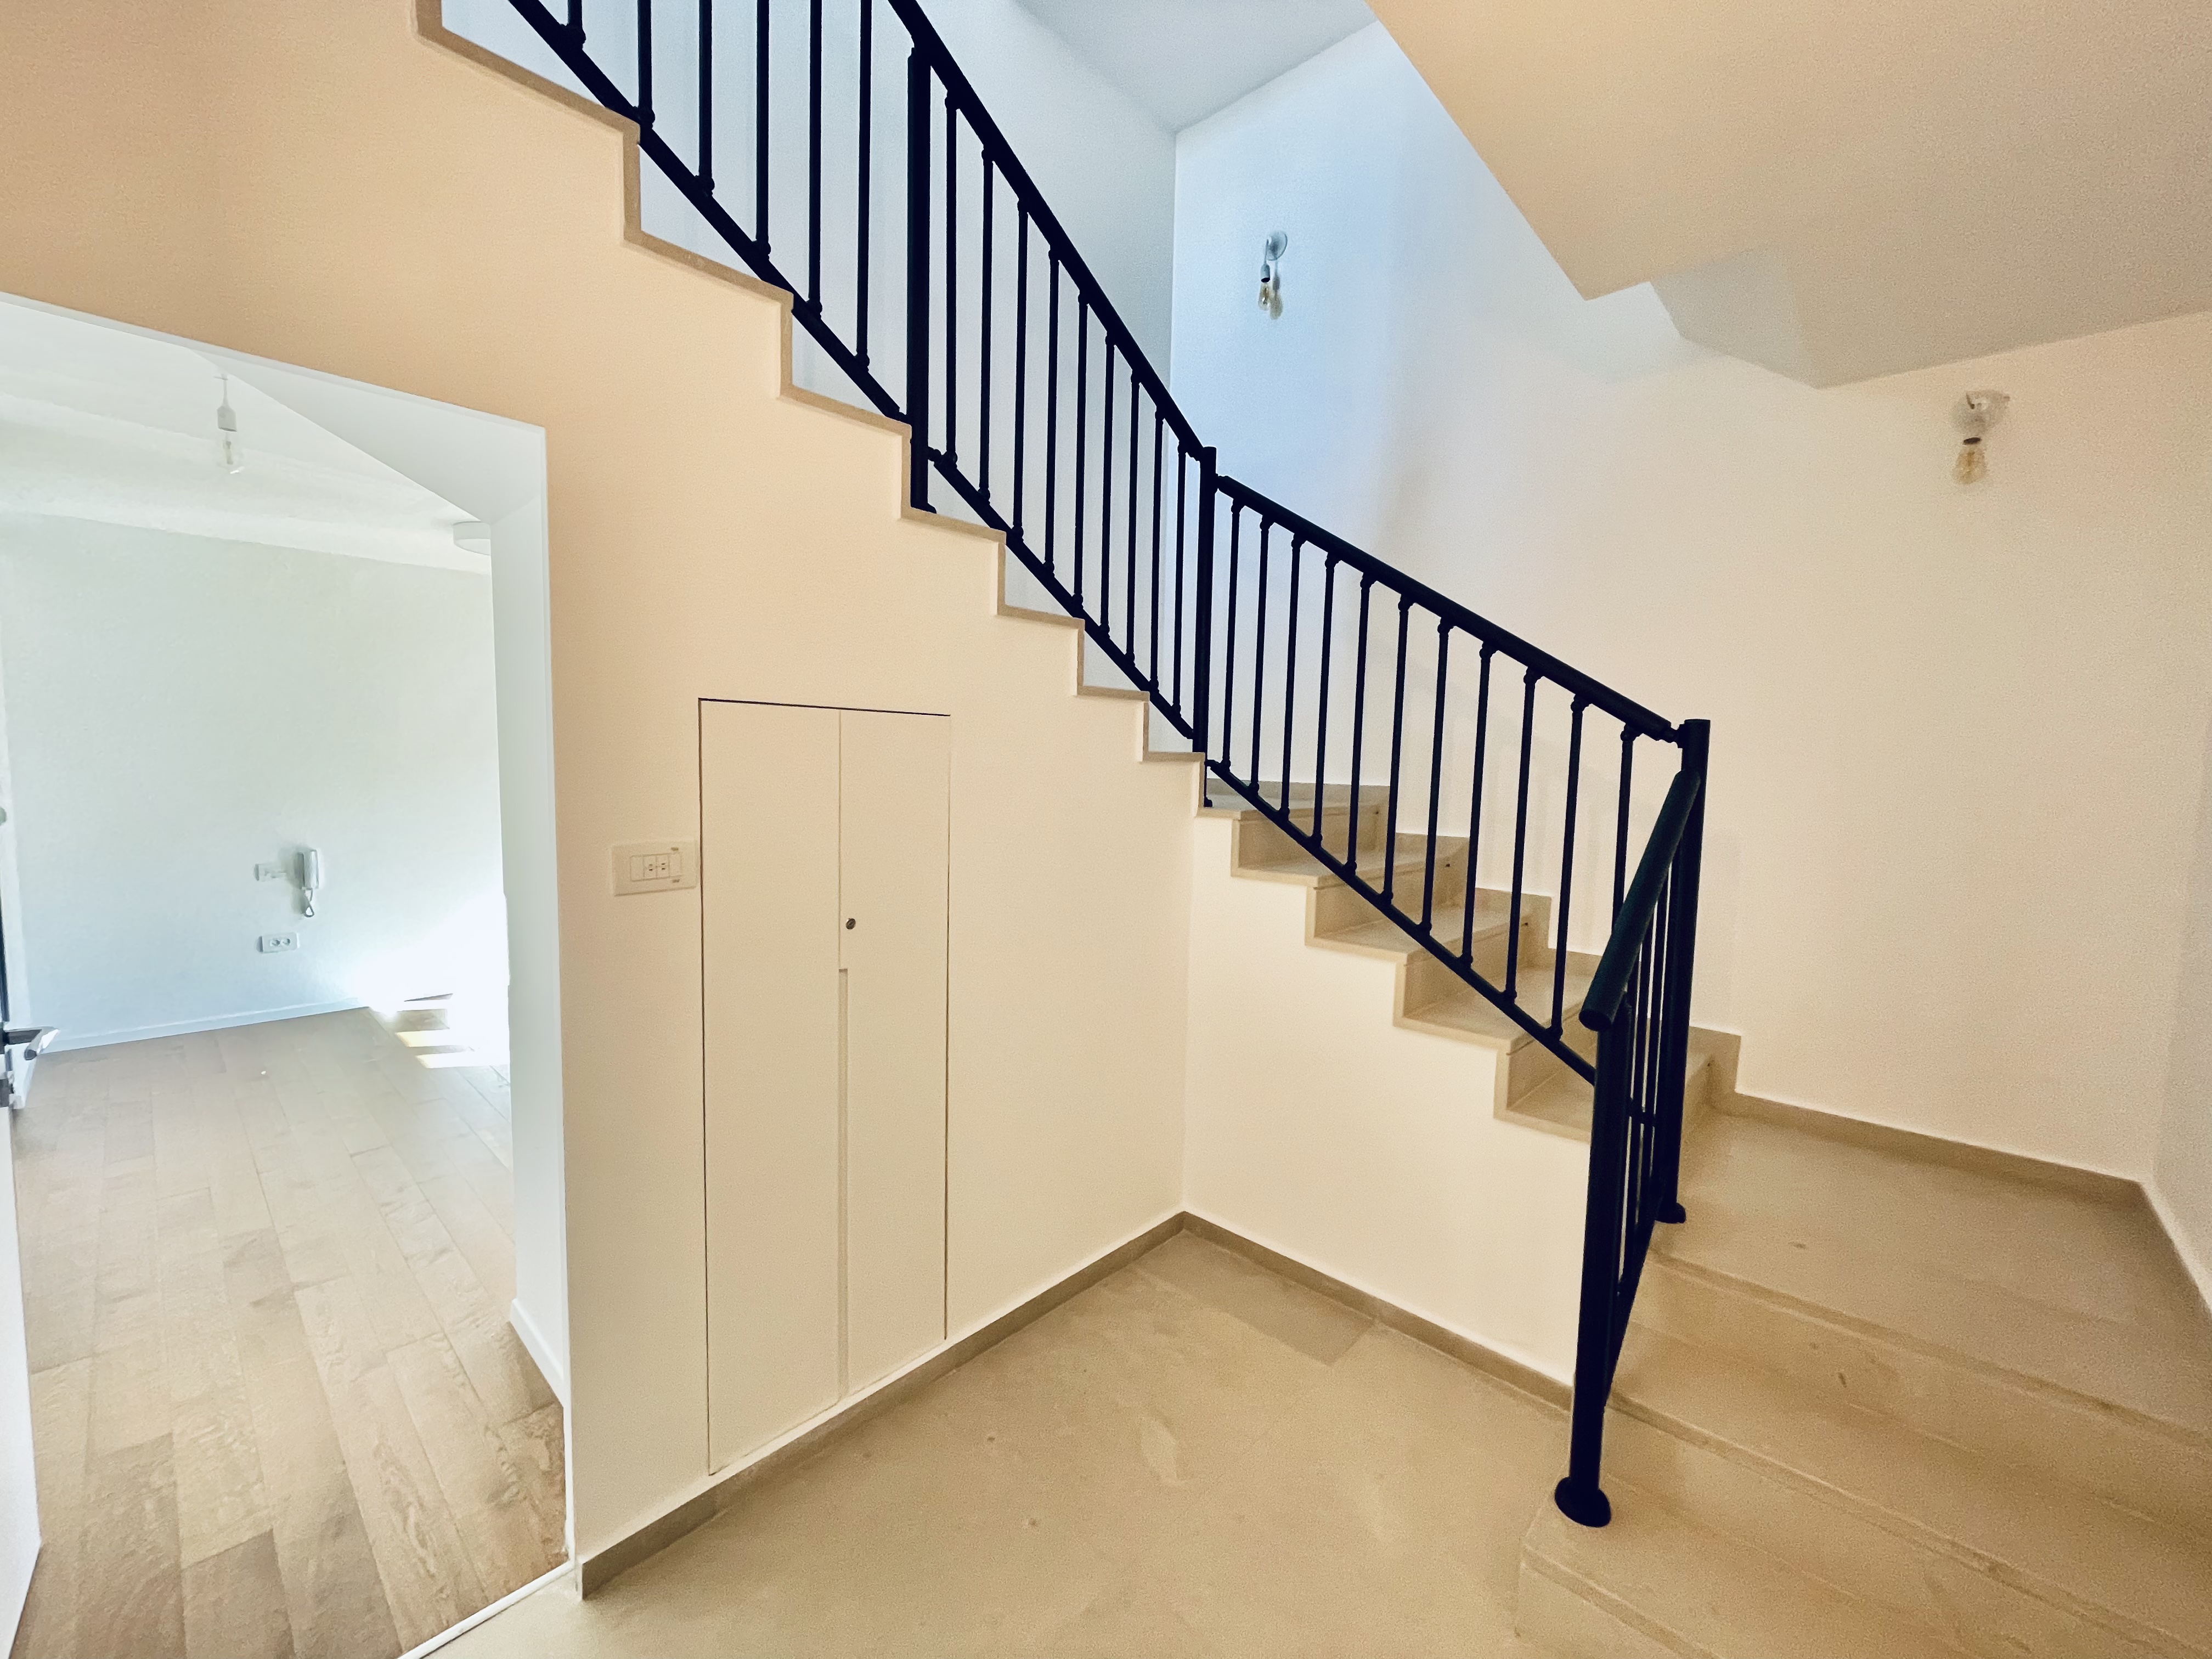 Staircase from master bedroom floor to main floor